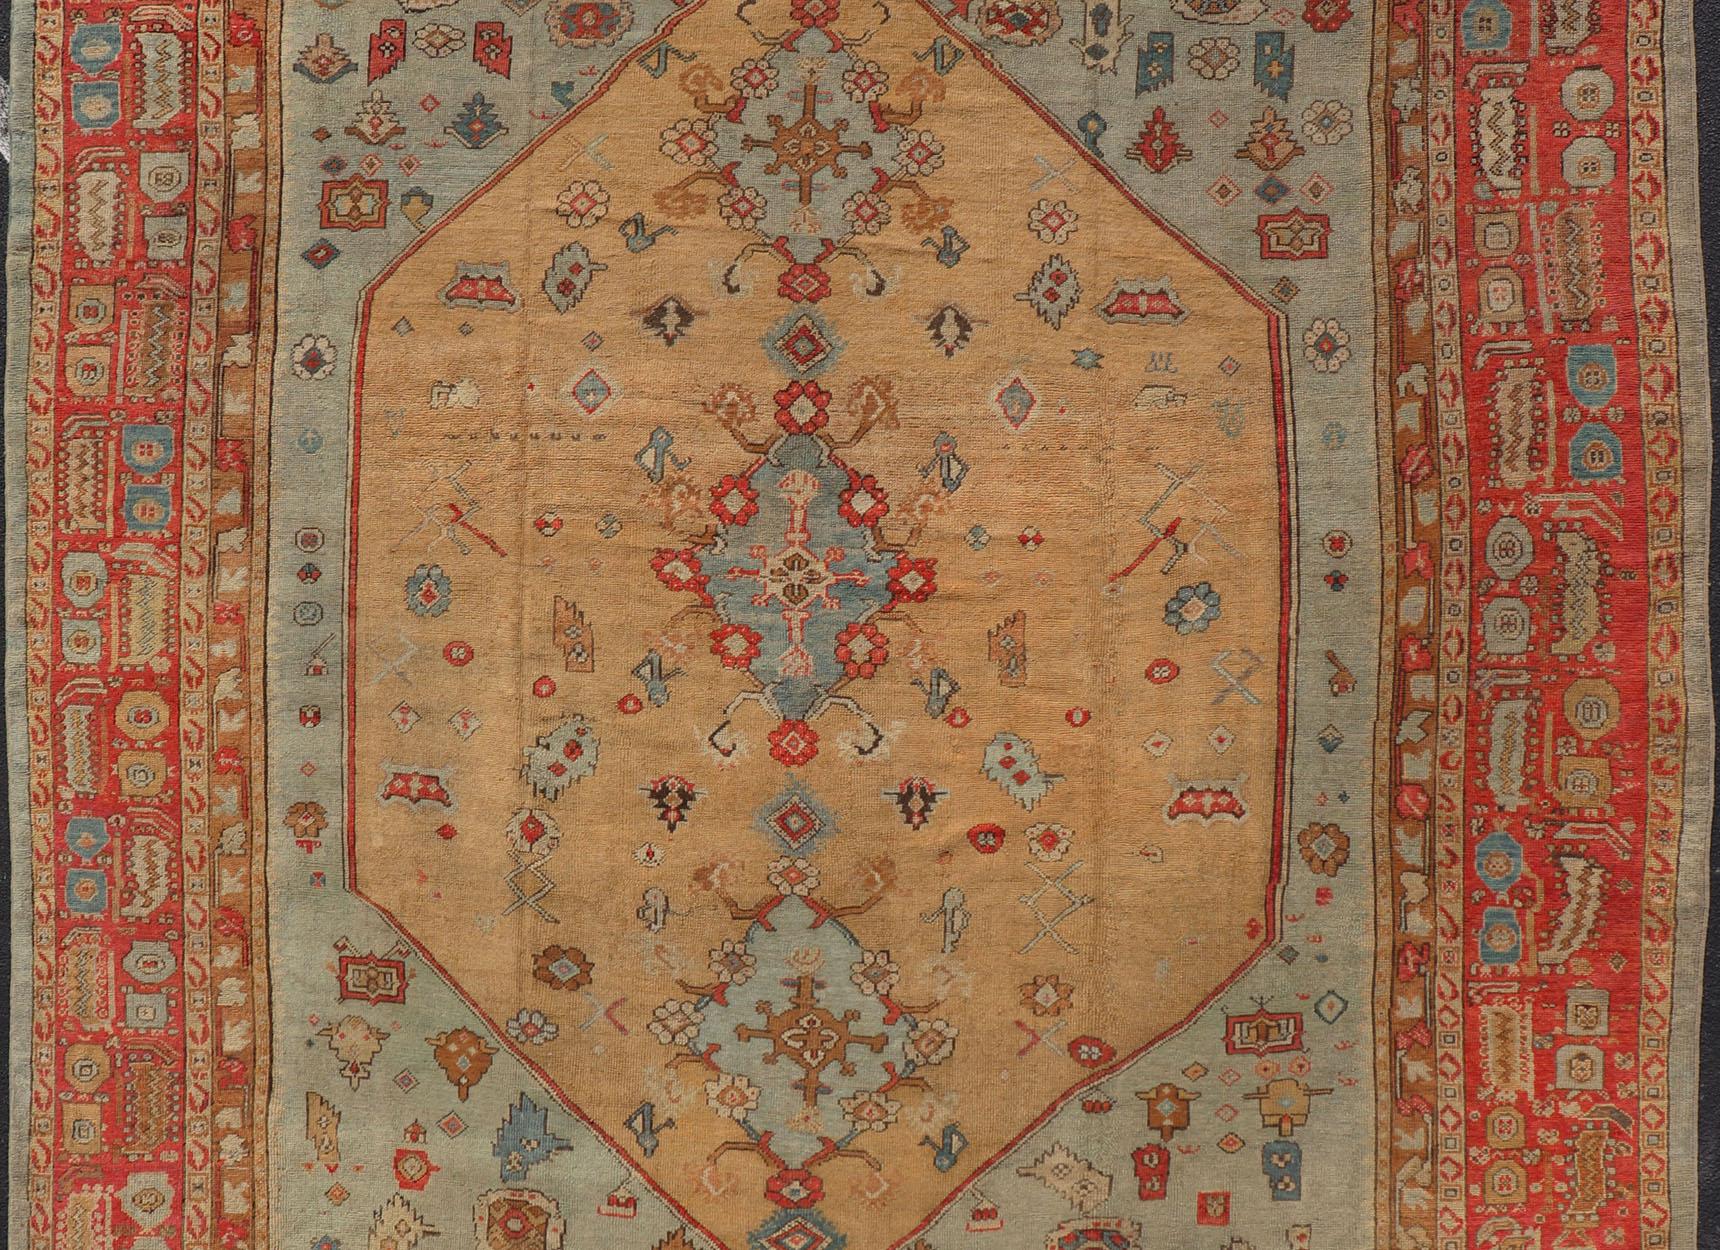 Antique Turkish Ghoirdes Oushak Rug With Medallion in Sky Blue, Tan, and Red. Keivan Woven Arts / Rug / S12-0308 / country of origin / type: Turkey / Oushak, circa 1880. Antique oushak, Turkish oushak, Turkish Ghoirdes.
Measures: 12.2 x